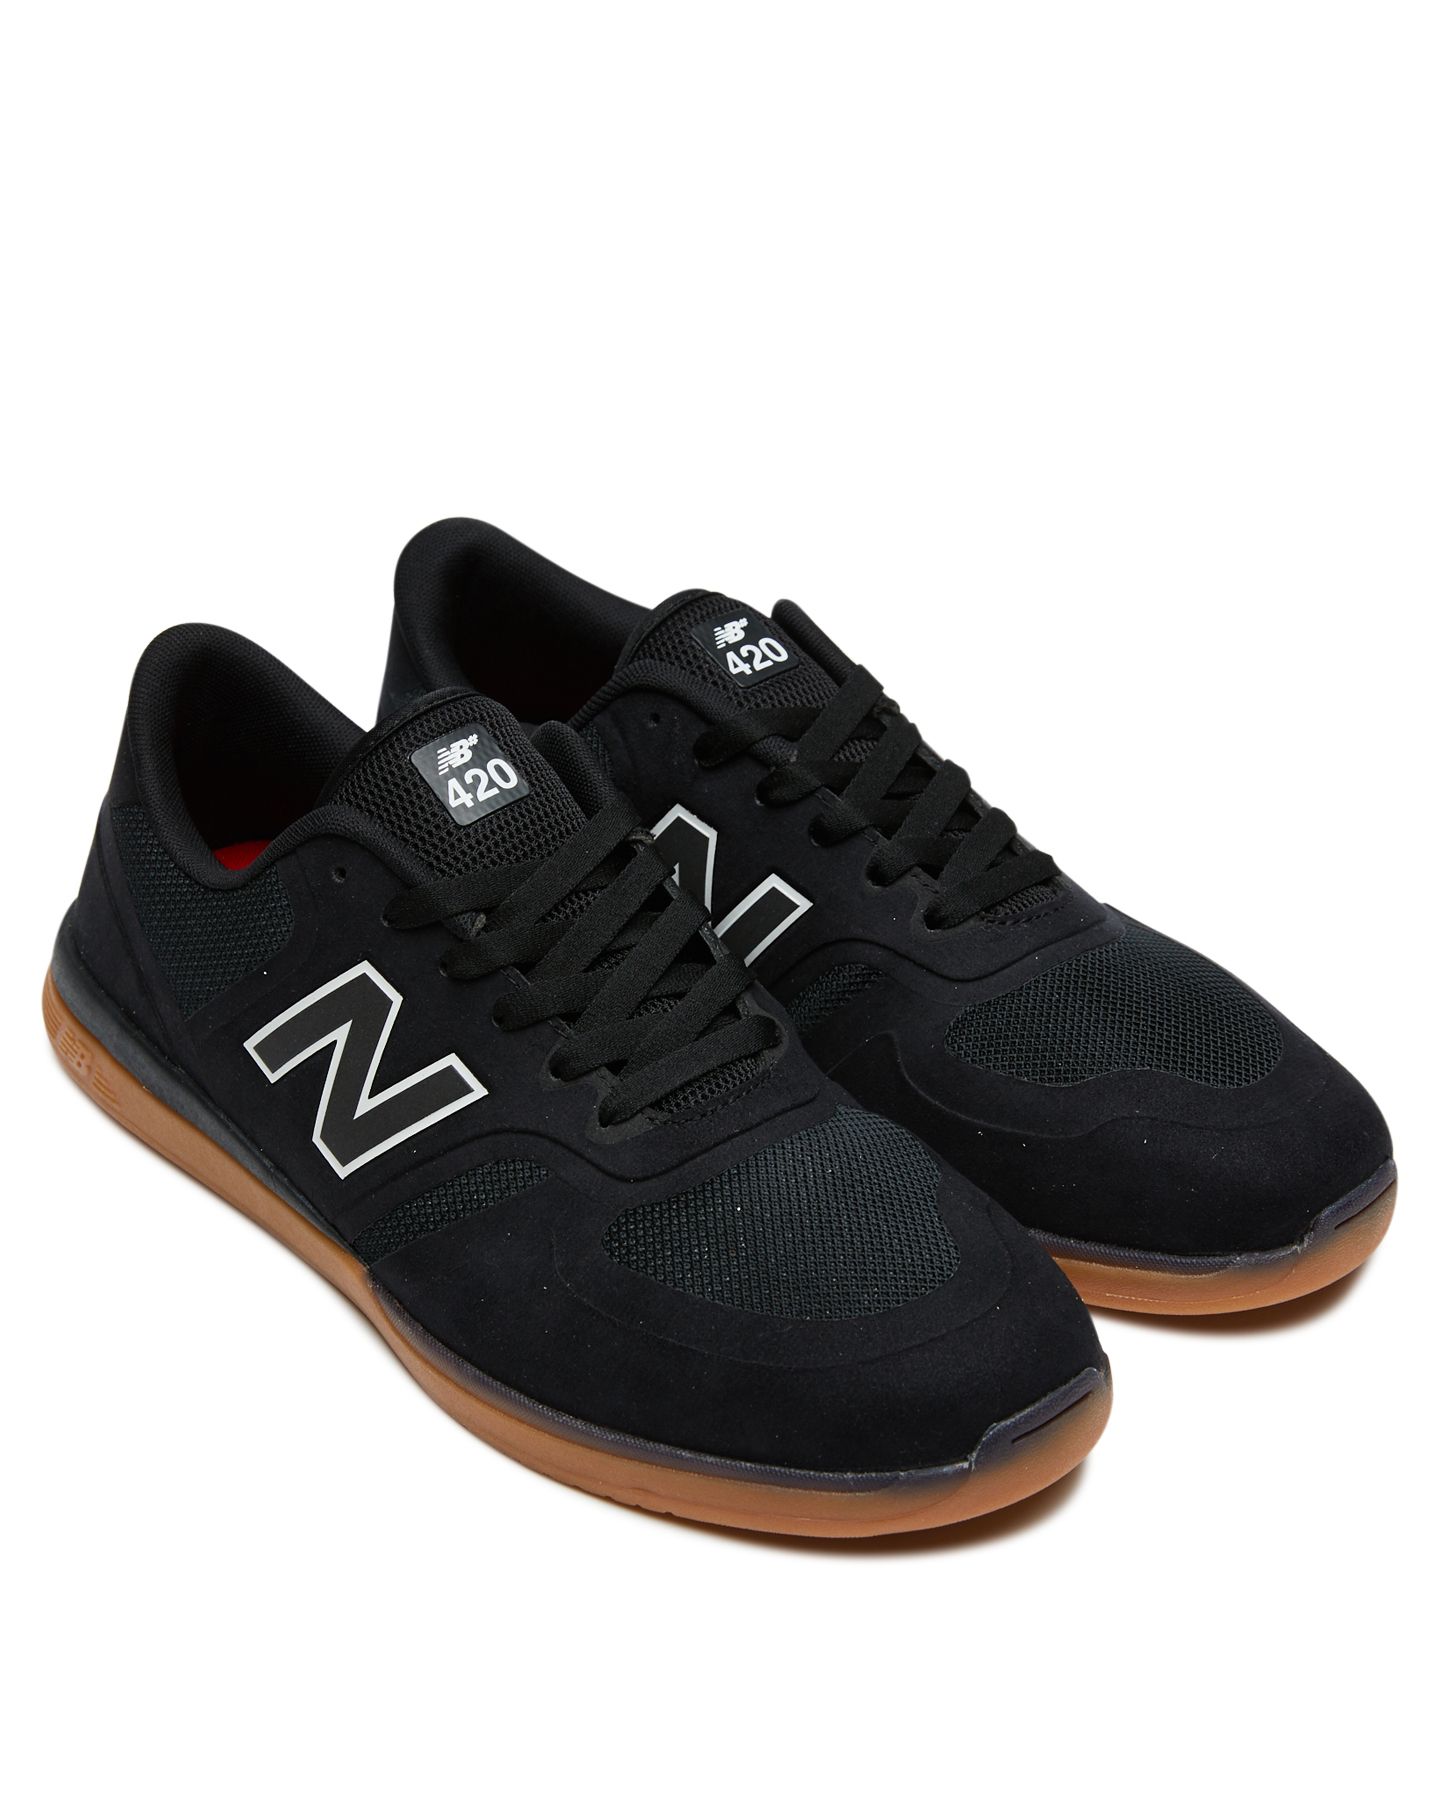 420 new balance sneakers